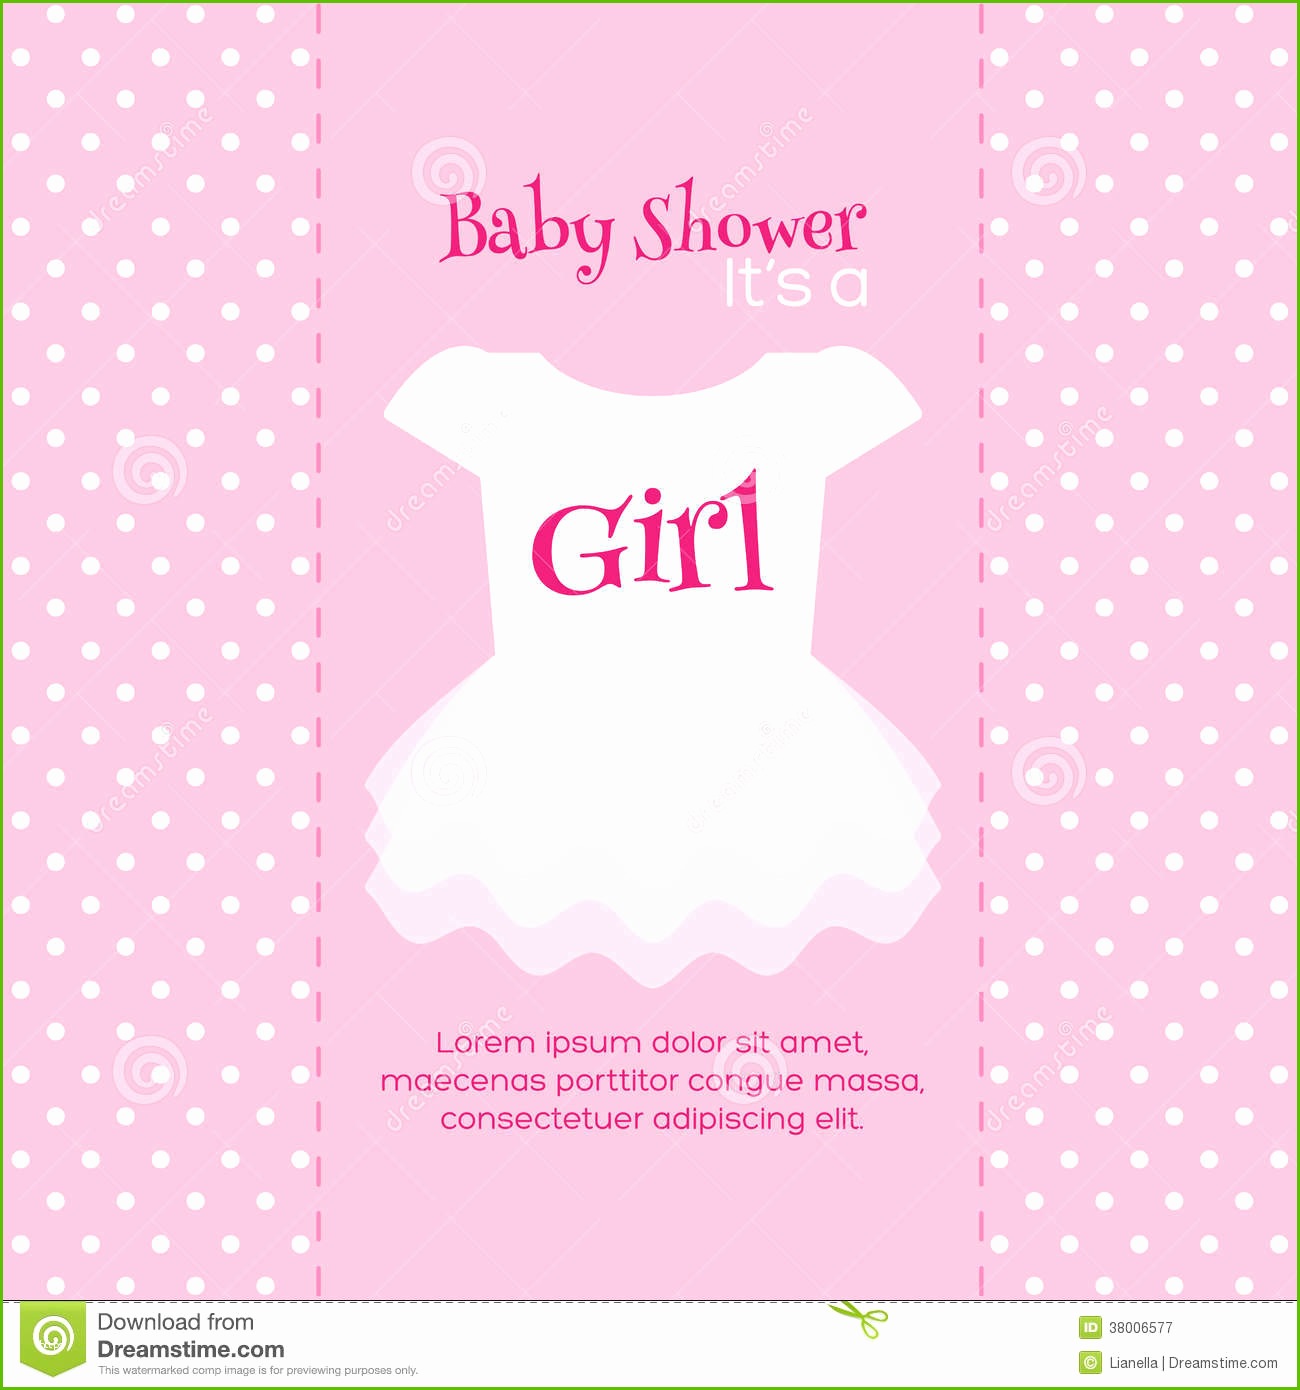 Full Size of Baby Shower:sturdy Baby Shower Invitation Template Image Concepts Baby Shower Poems With Baby Shower Accessories Plus Baby Shower Props Together With Save The Date Baby Shower As Well As Baby Shower Paper